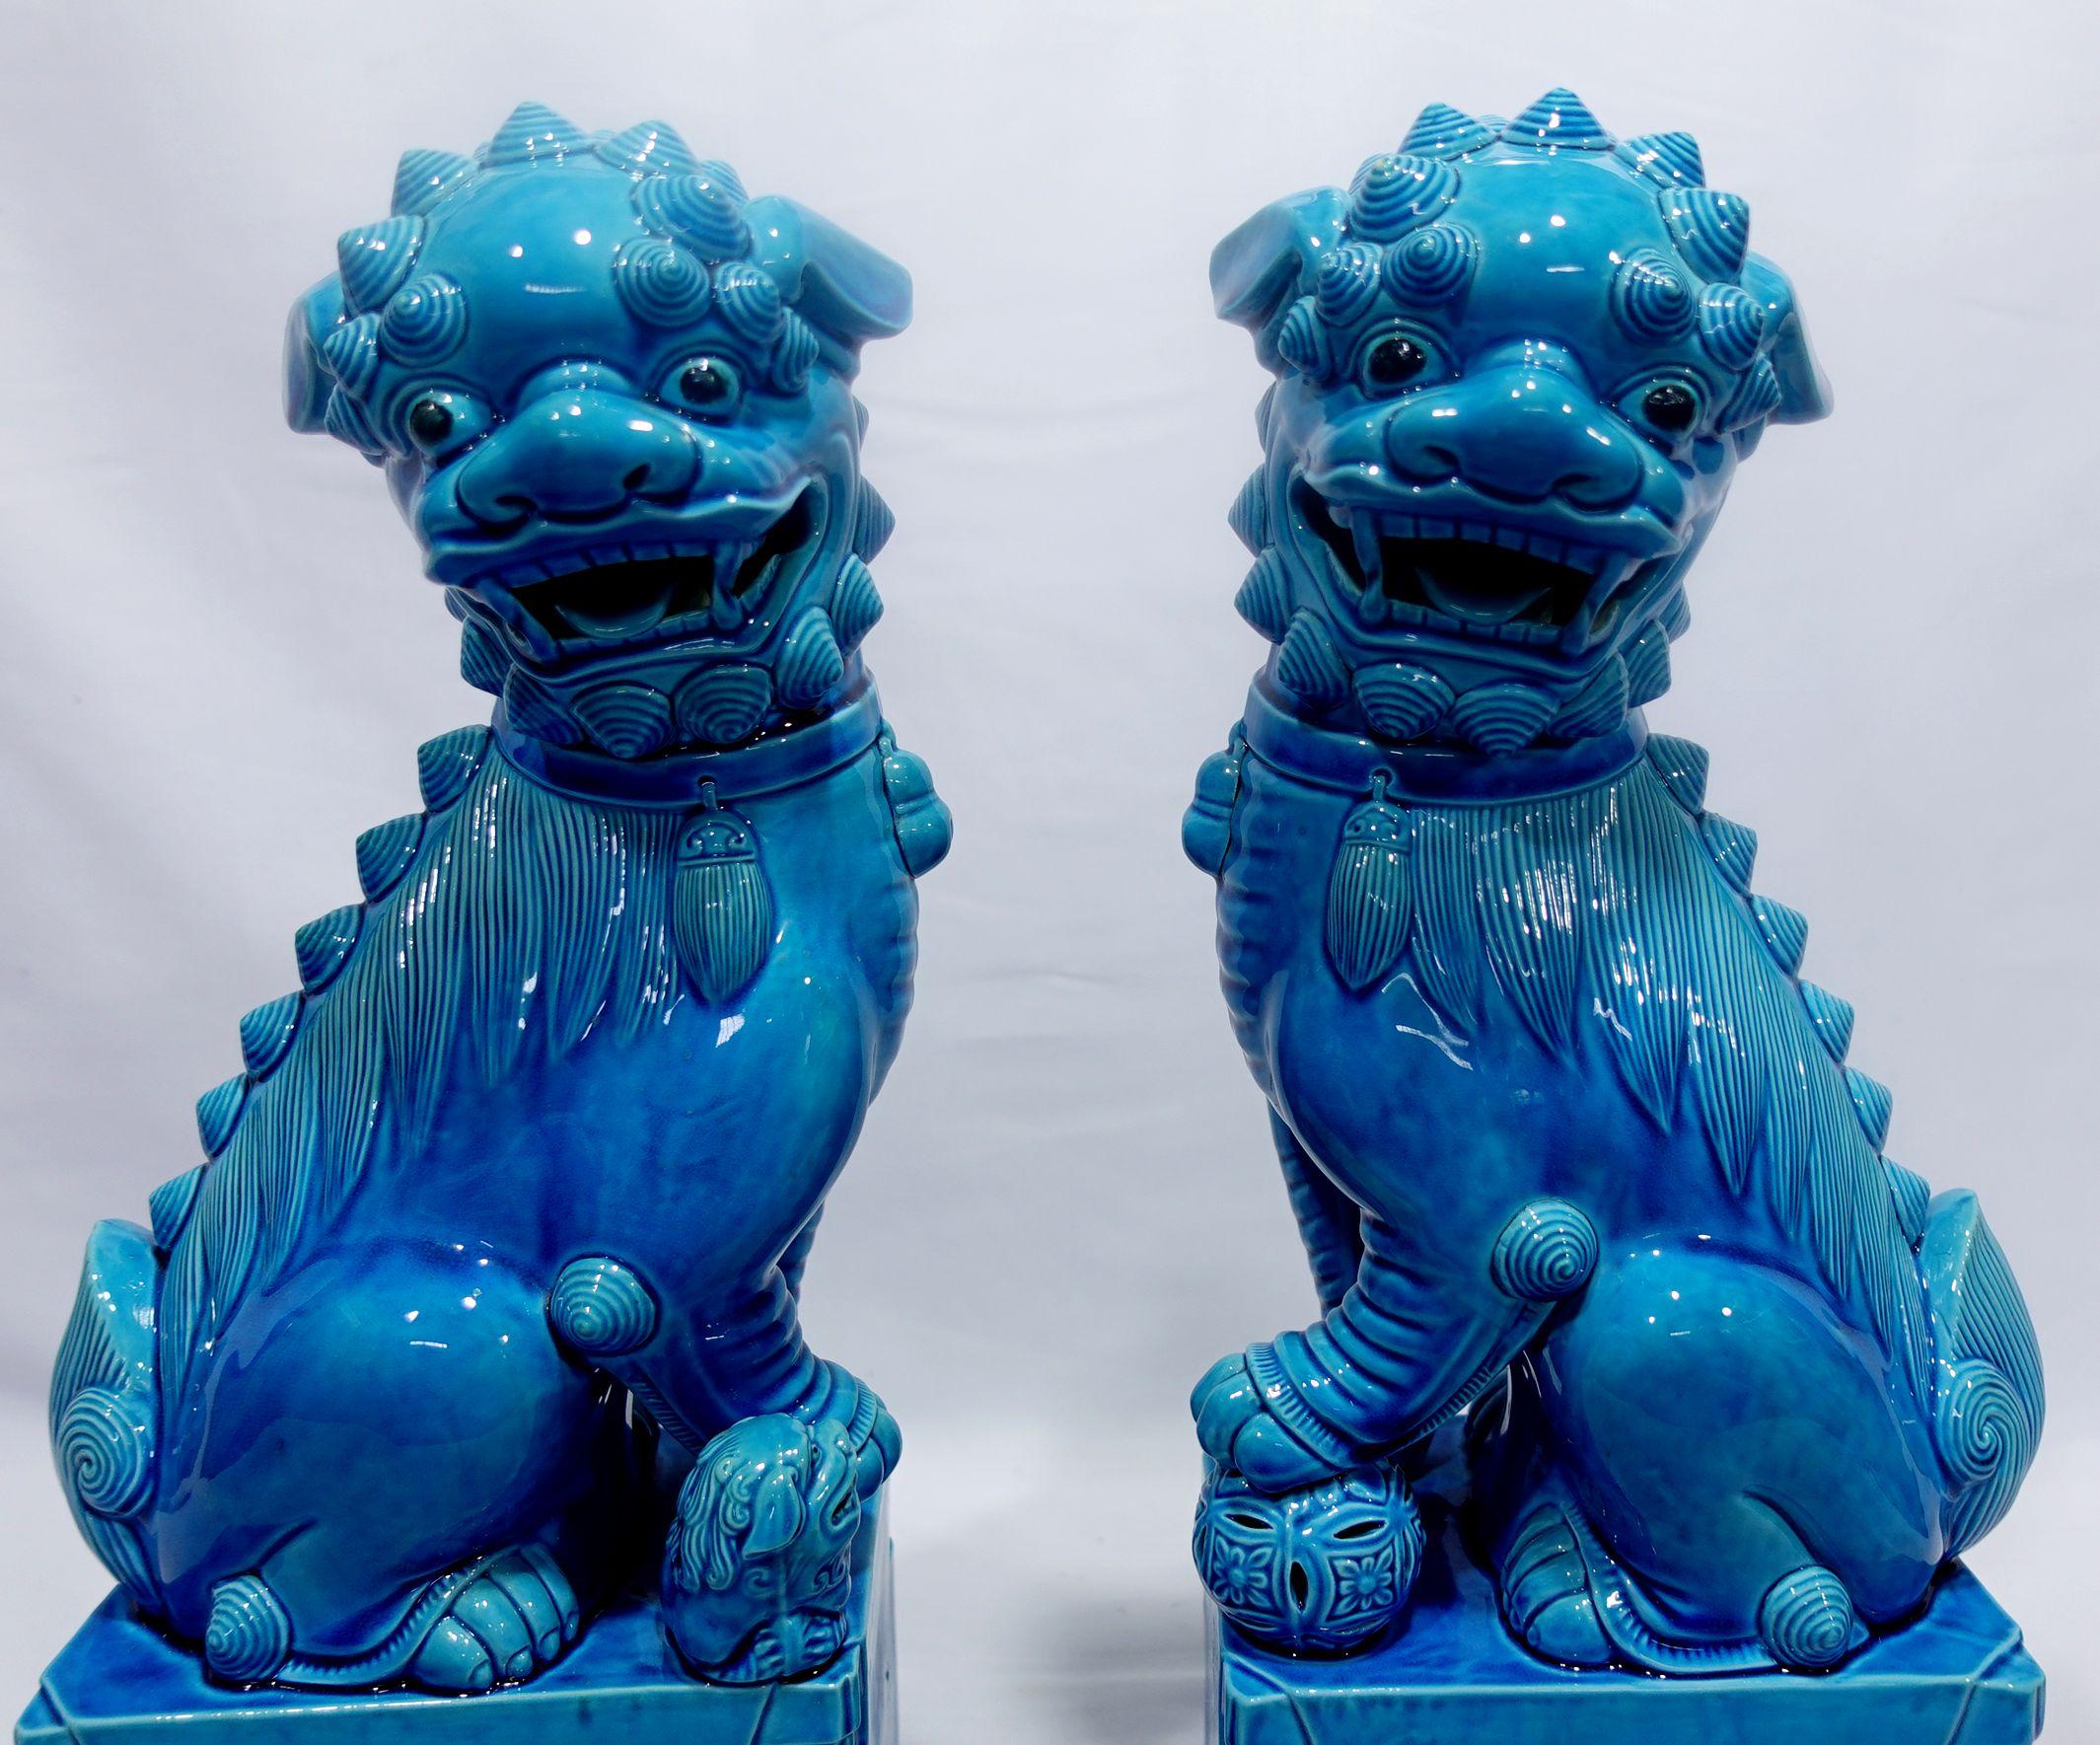 Huge, Fine, and very detailed pair of Chinese turquoise glazed foo dogs from the mid-20th century. The hollow biscuit porcelain figures stand raised on a rectangular base and look sideways with open mouths and tongues showing teeth each with a